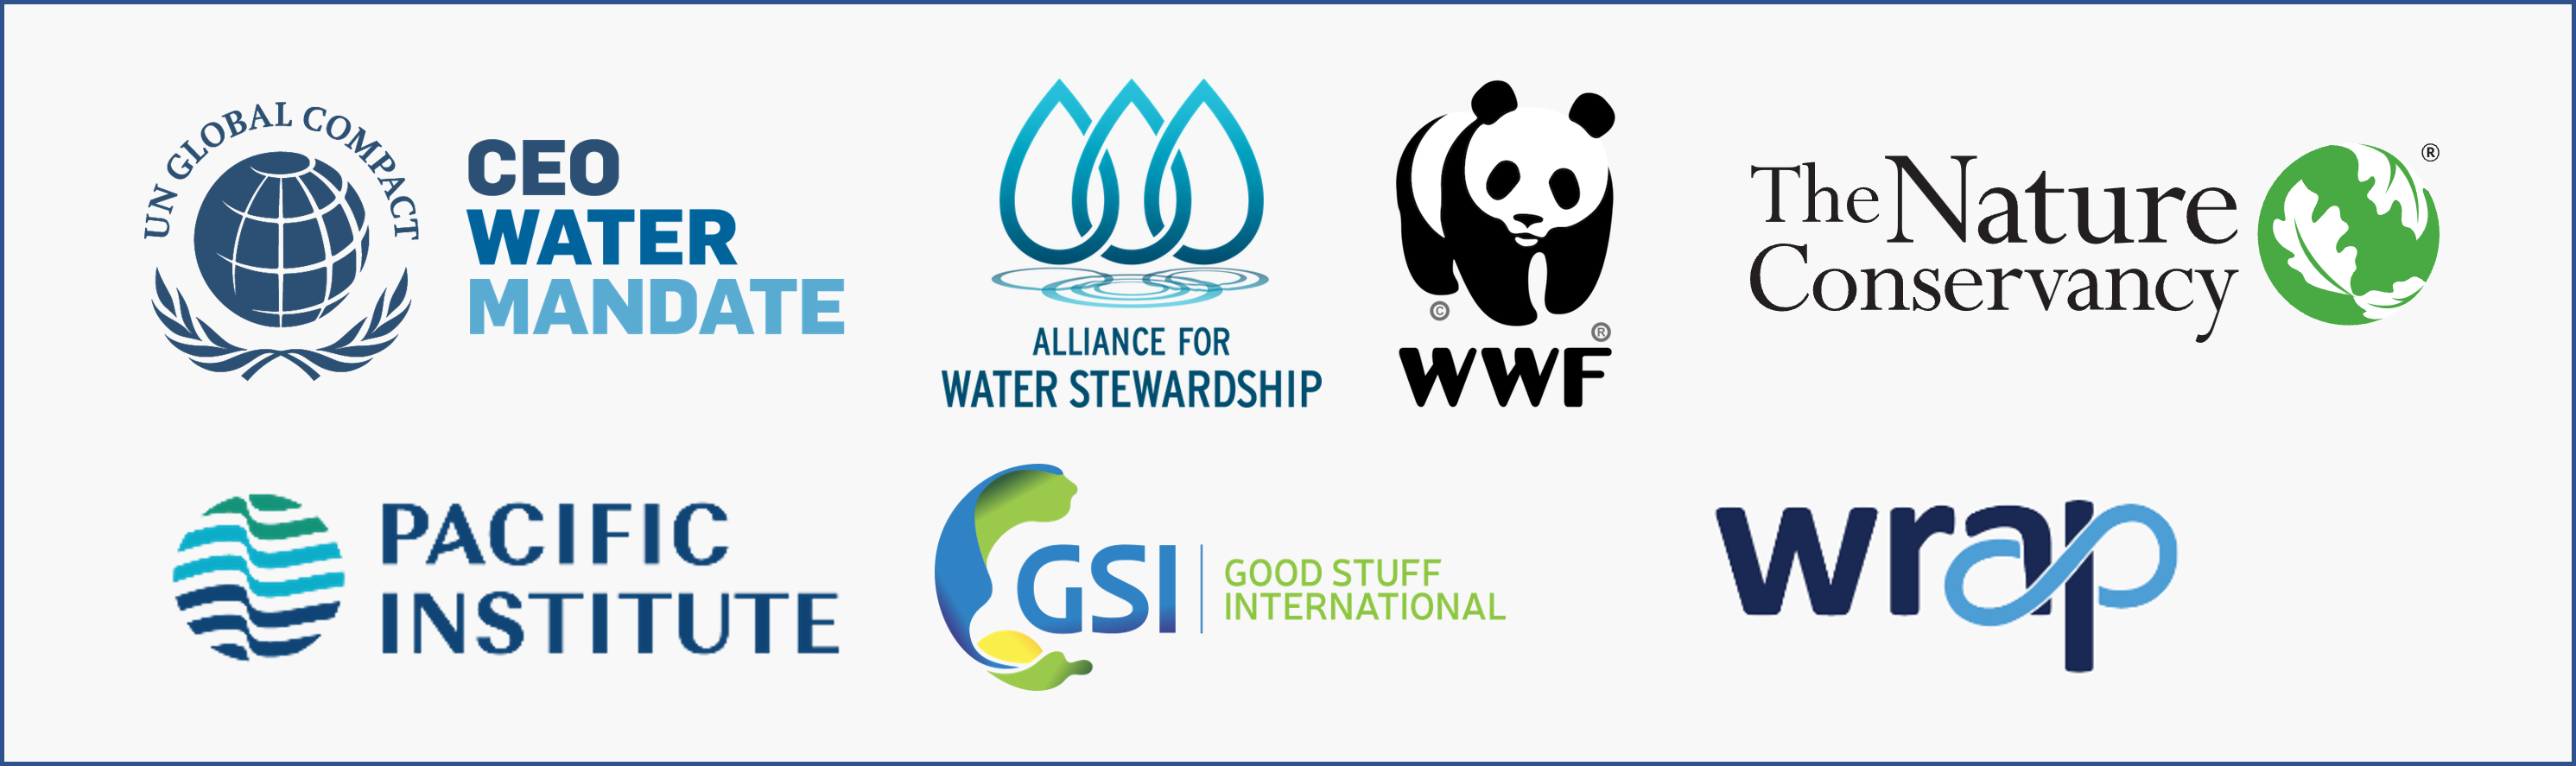 Logos of collaborating organizations - CEO Water Mandate, WWF, TNC, WRAP, Pacific Institute, AWS, GSI